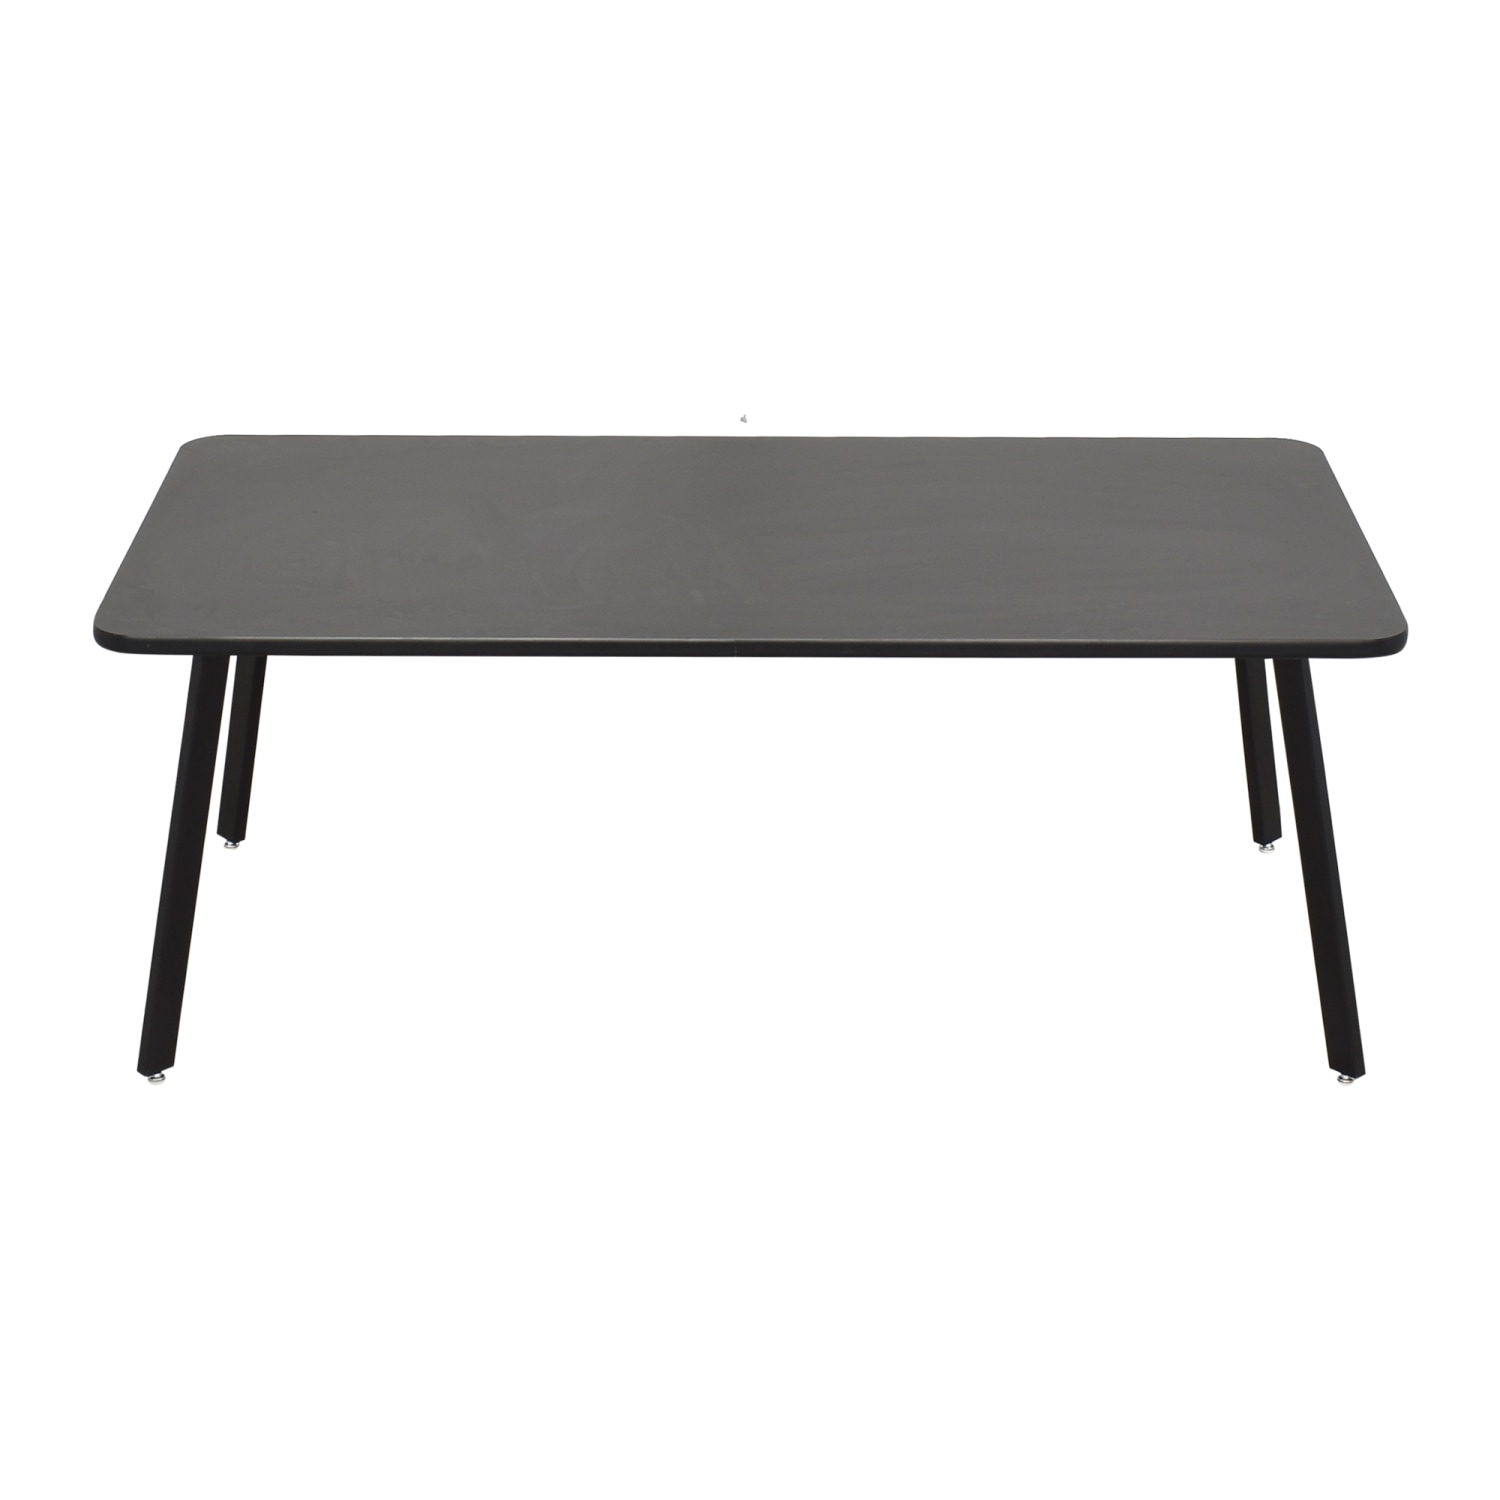 Knoll Rockwell Unscripted Desk | 41% Off | Kaiyo